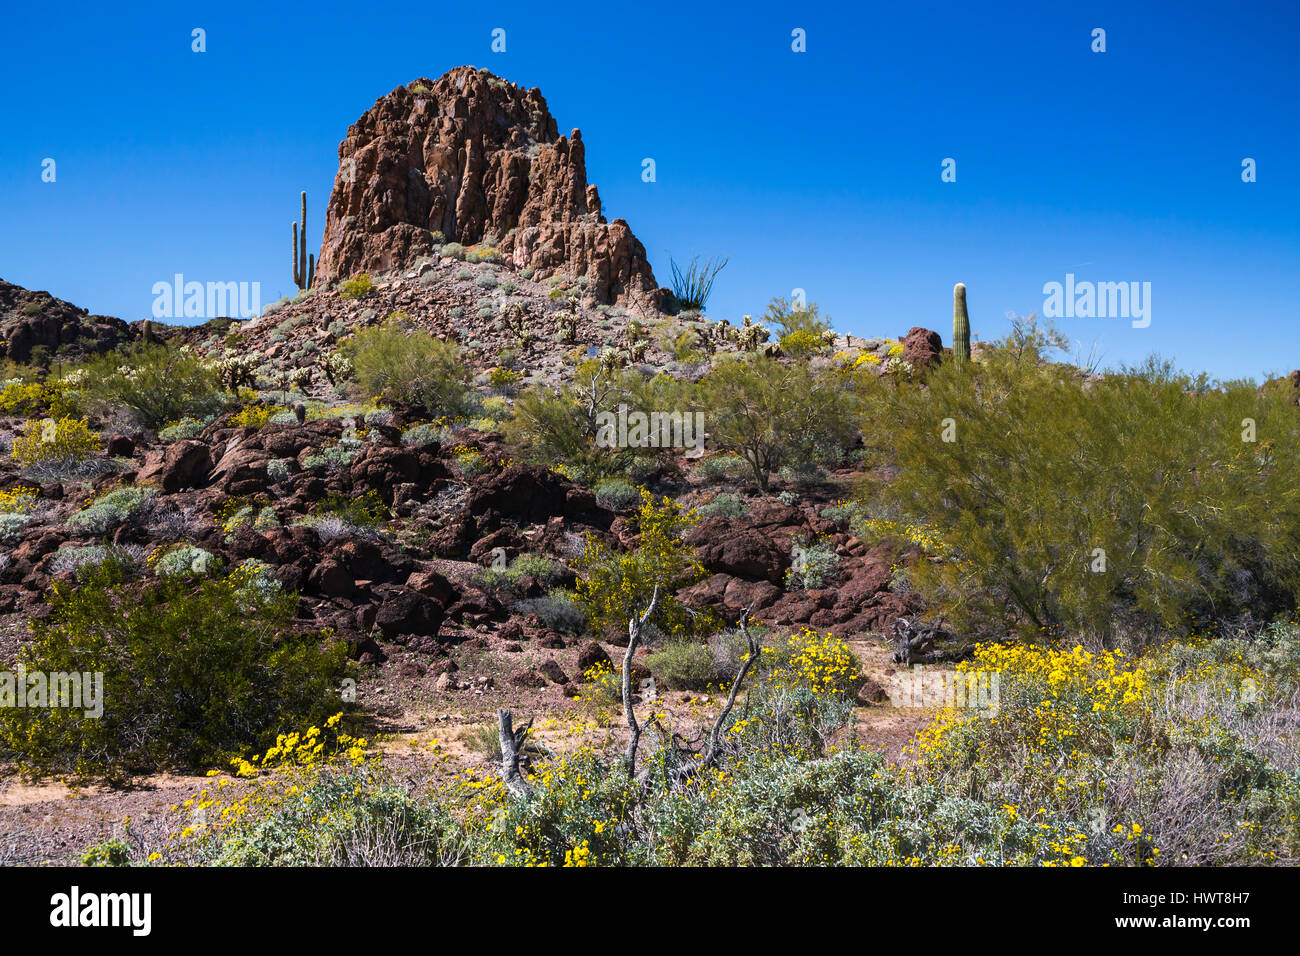 A view of the Sonoran Desert and spring vegetation north of Ajo, Arizona, USA. Stock Photo